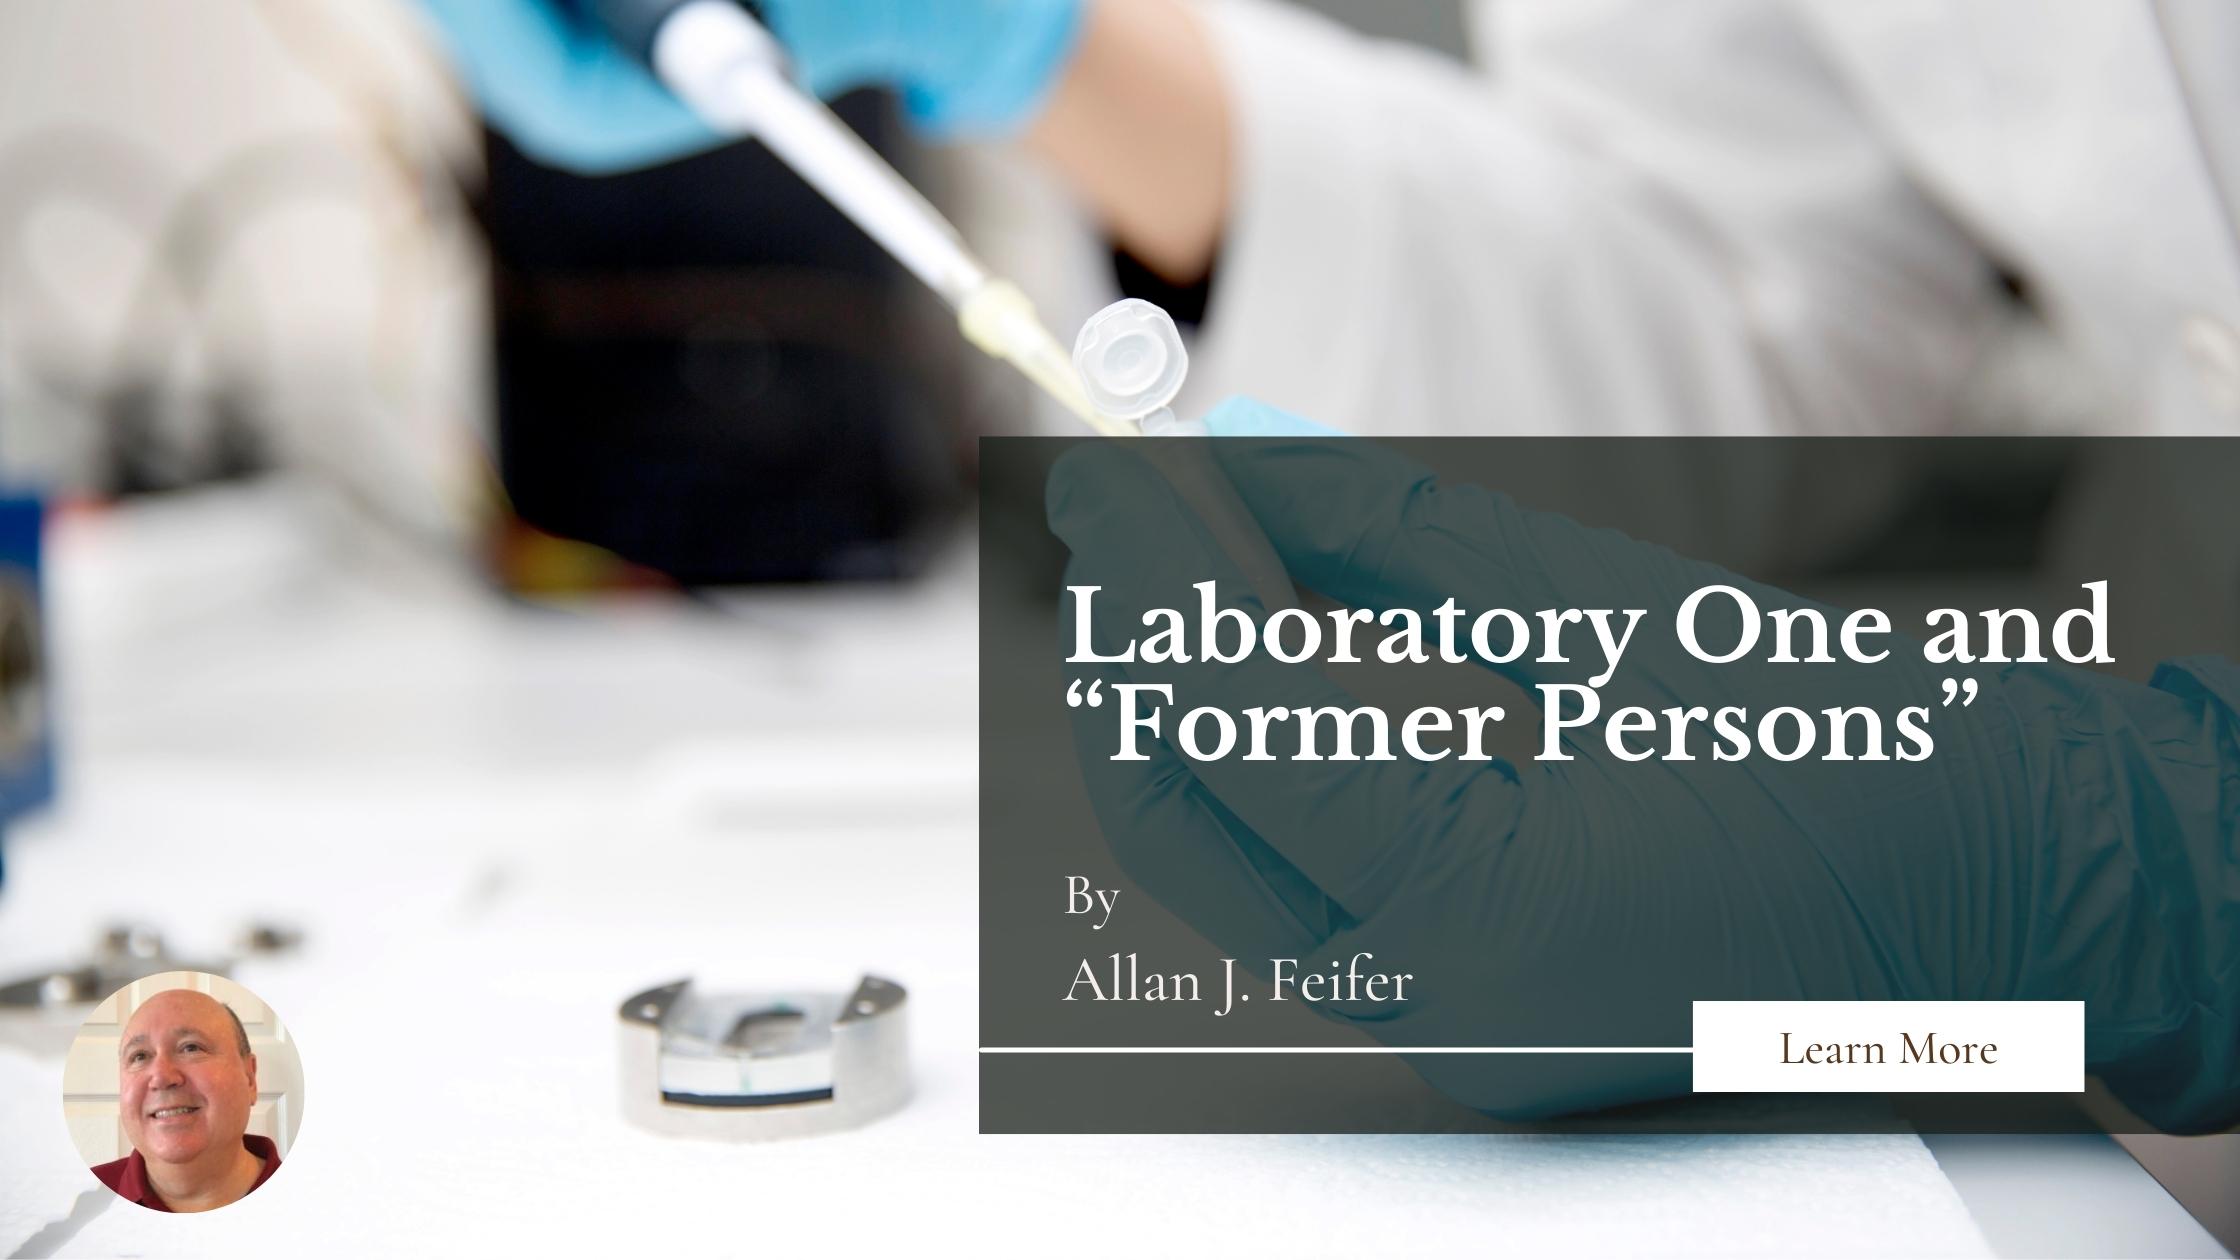 Laboratory One and “Former Persons”